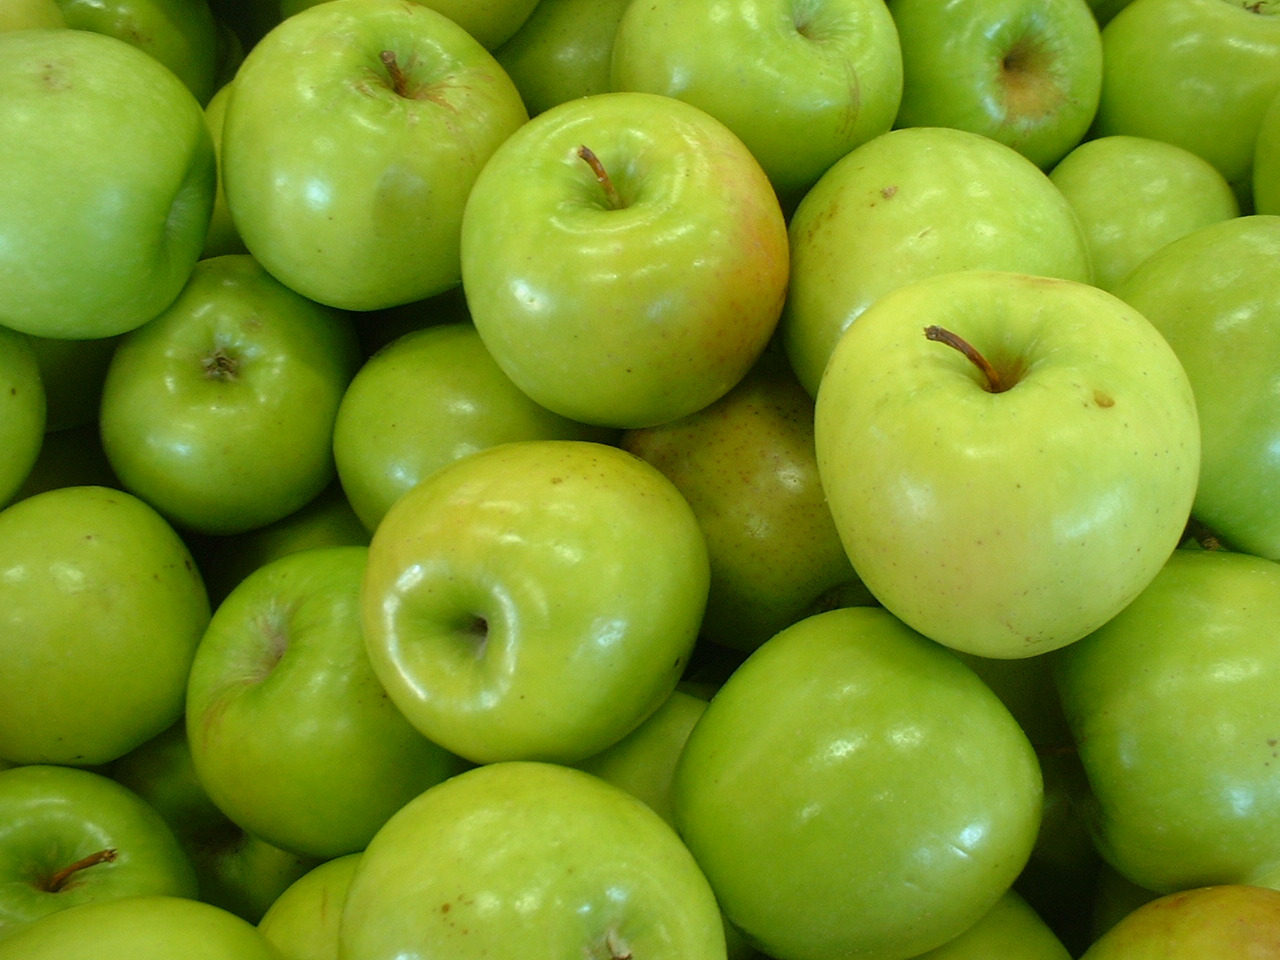 lots of green apples piled on top of each other